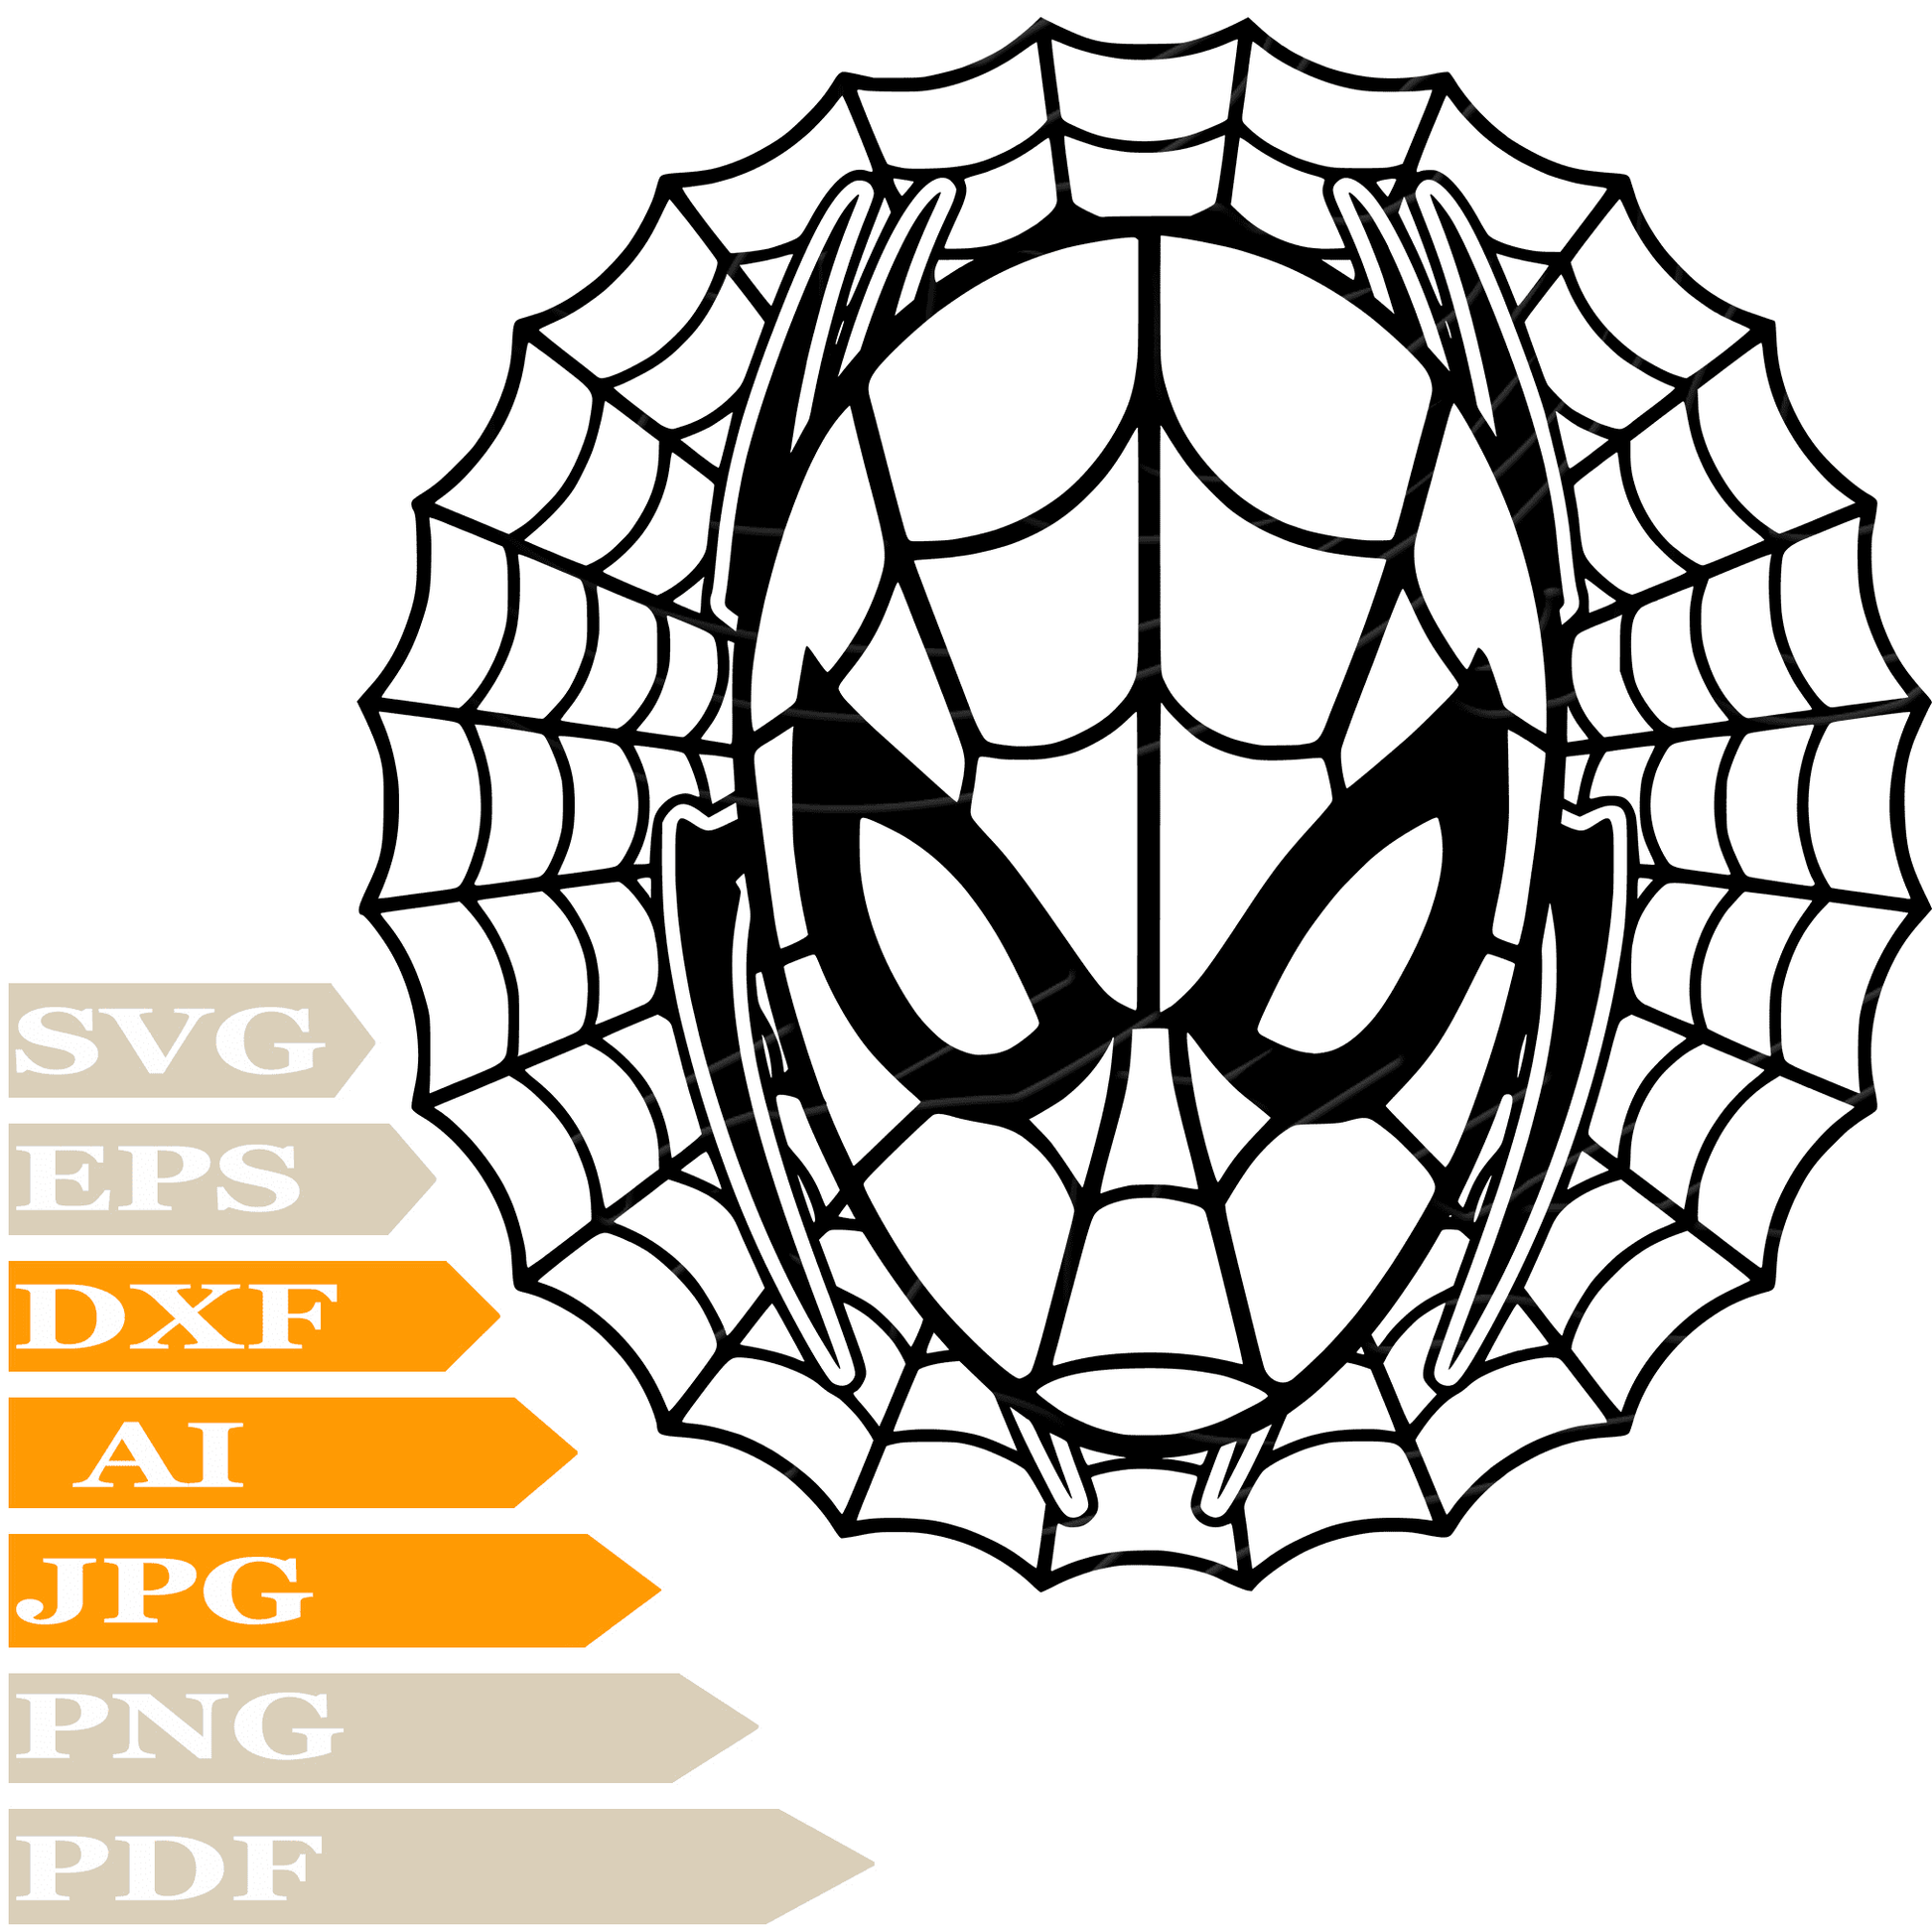 Spider SVG-Spiderweb SVG File-Spiderman Drawing SVG-Spiderman Head Vector Graphics-Clip Art-Image Cut File-Illustration-PNG-For Cricut -Instant download-For Shirts-Silhouette